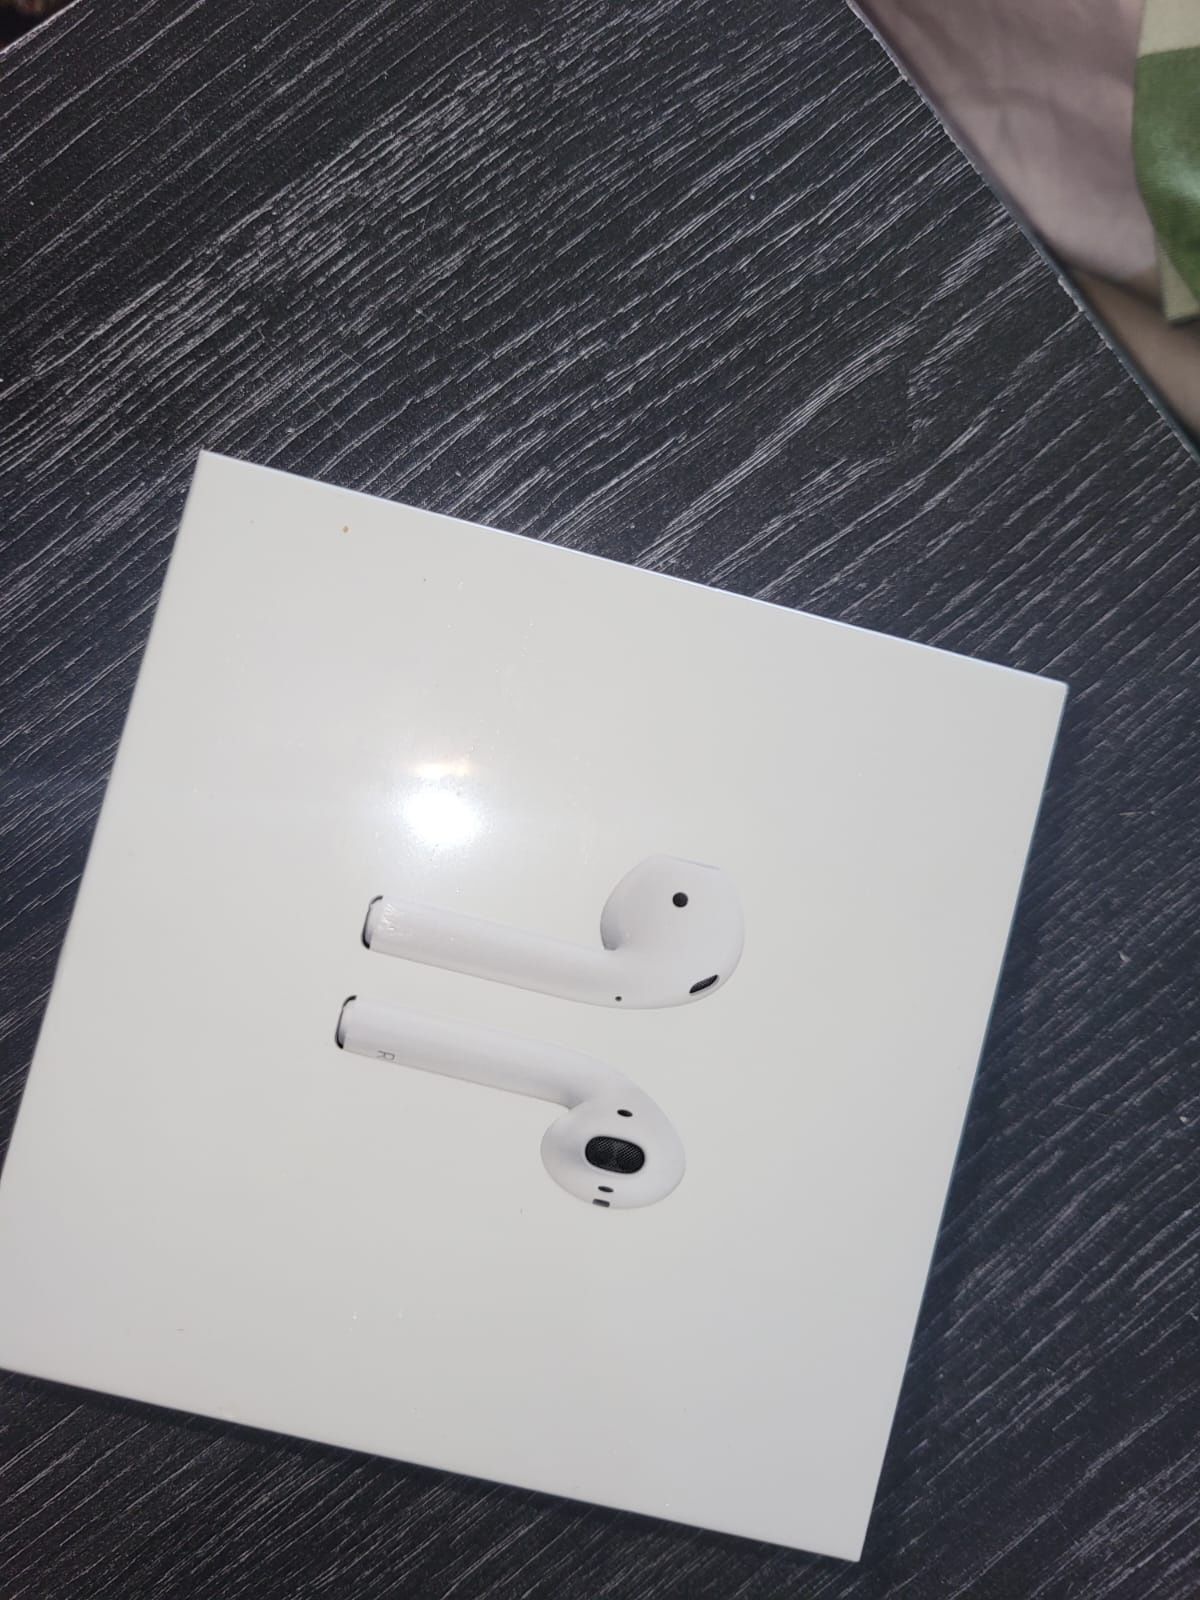 Airpods 2nd CHARGING CASE MODEL: A2032